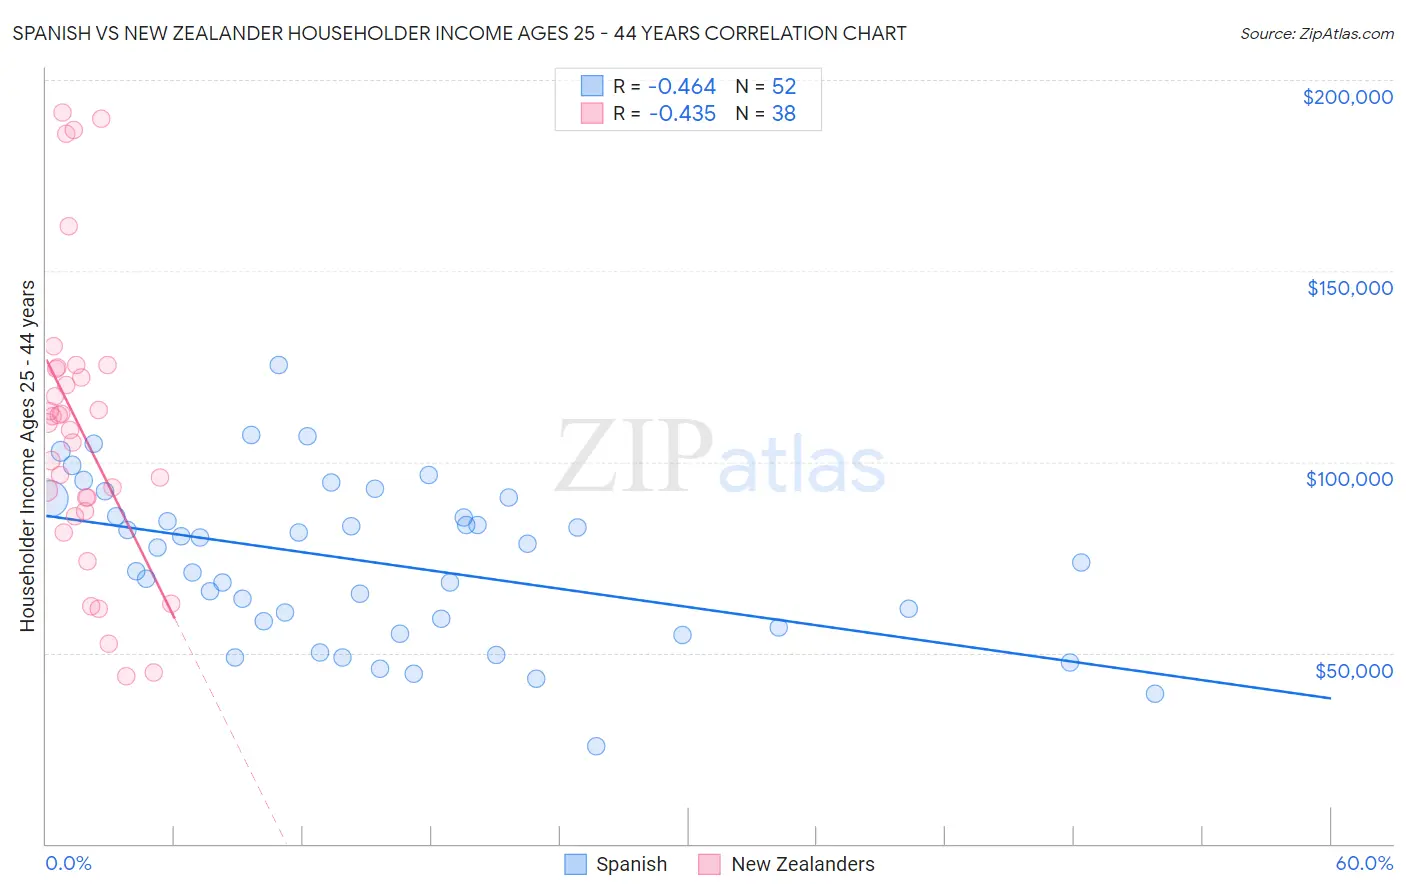 Spanish vs New Zealander Householder Income Ages 25 - 44 years